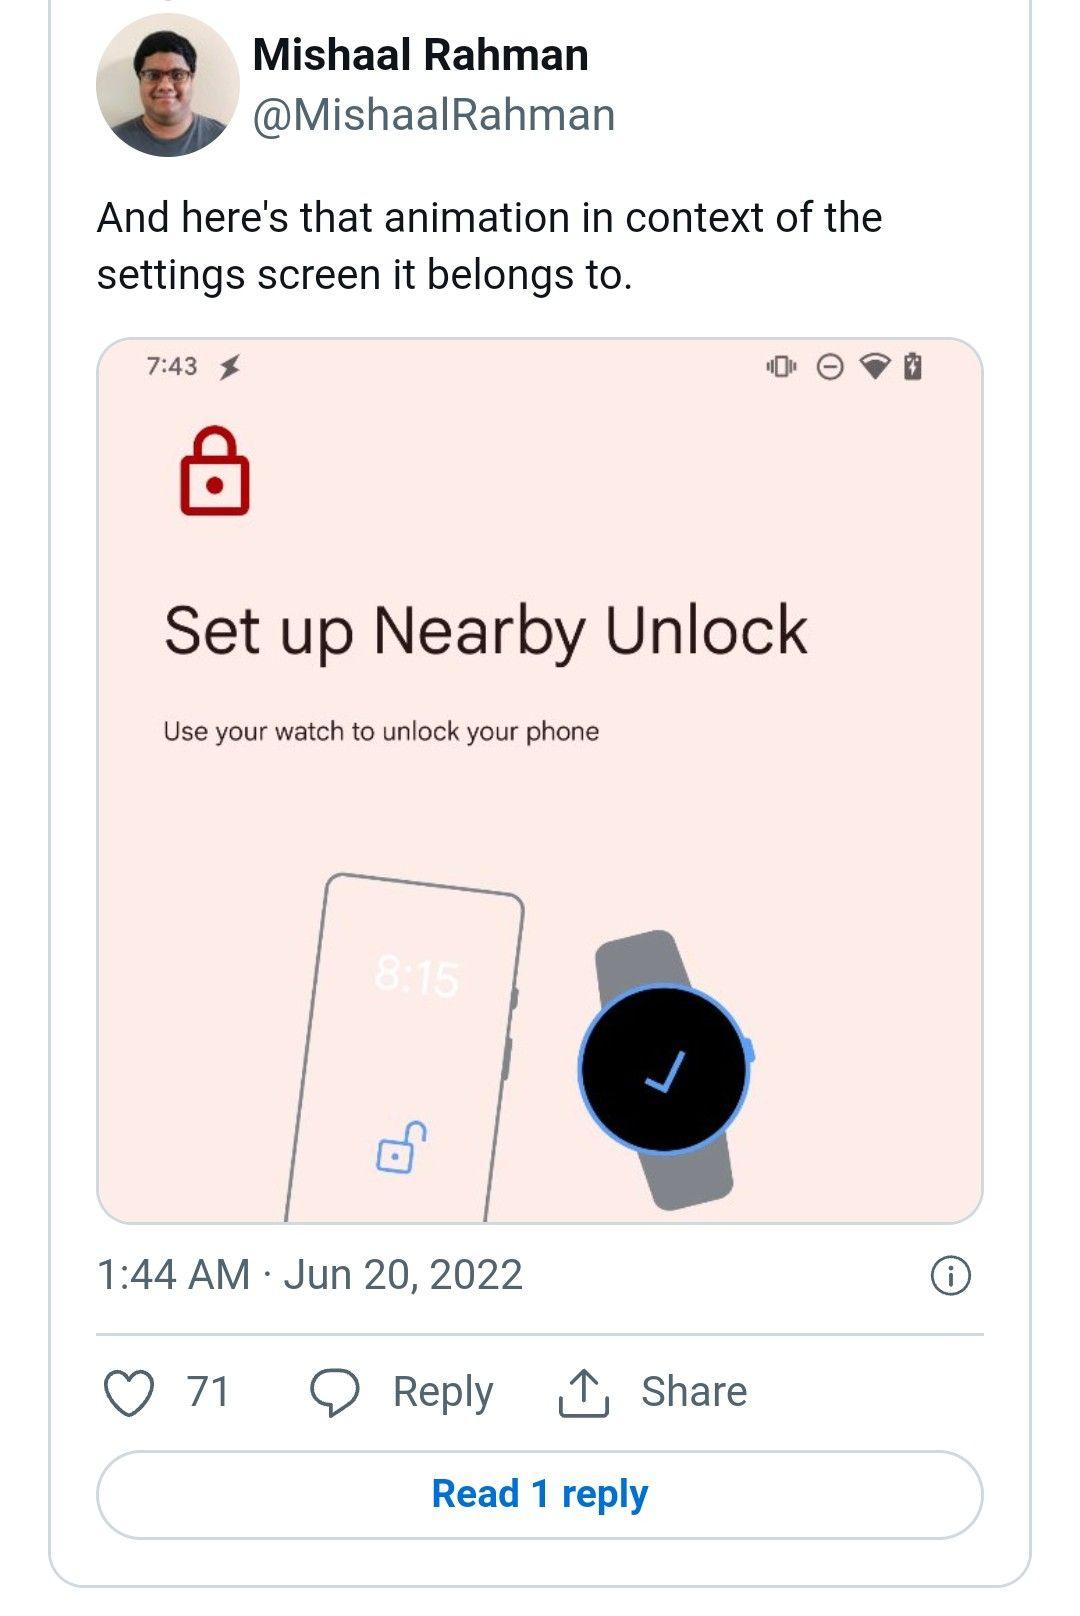 How to unlock an Android phone using a smartwatch